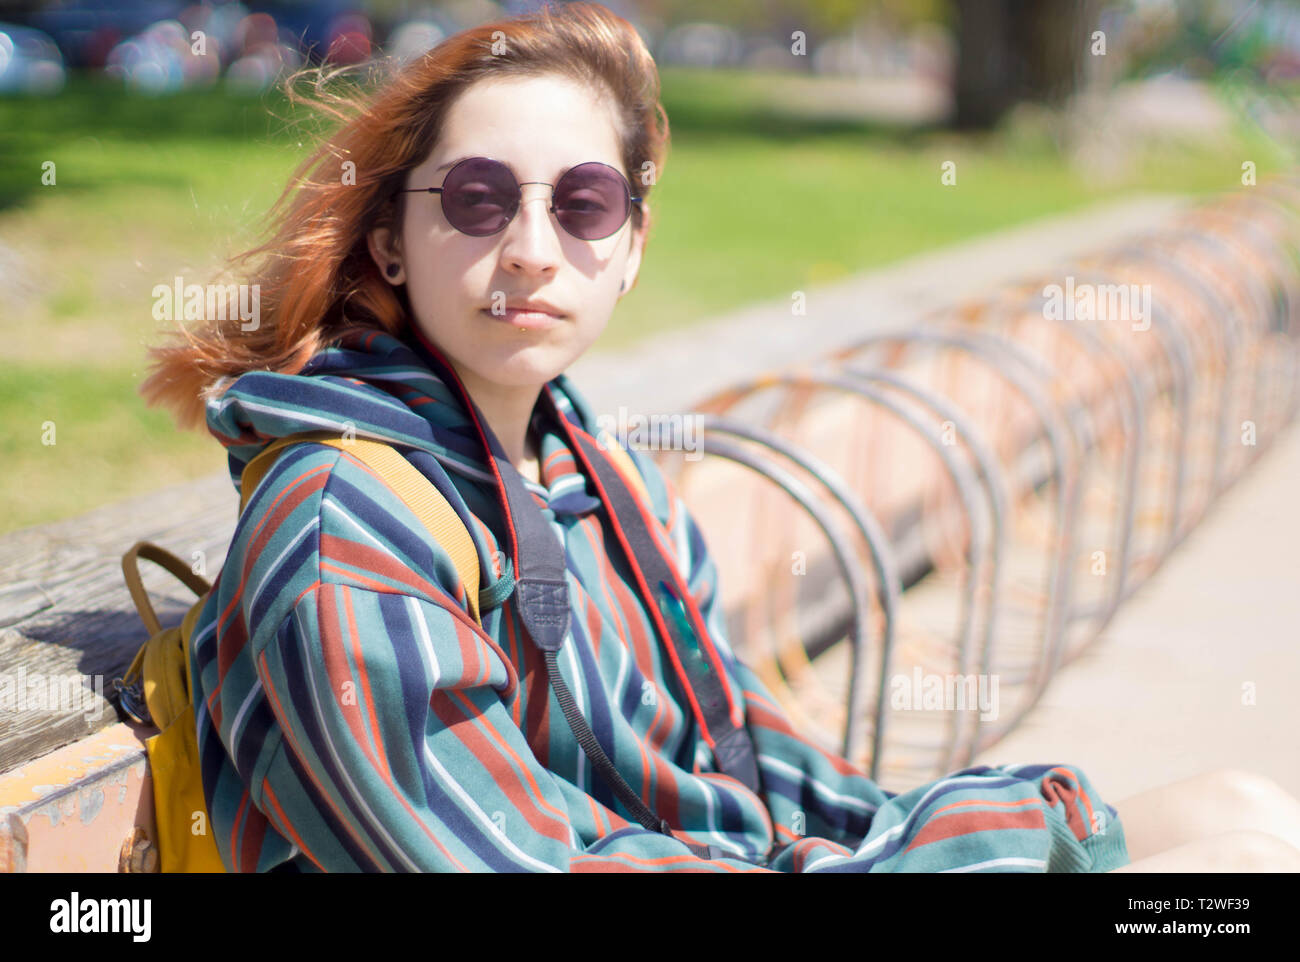 wind blowing against hip sitting model Stock Photo - Alamy